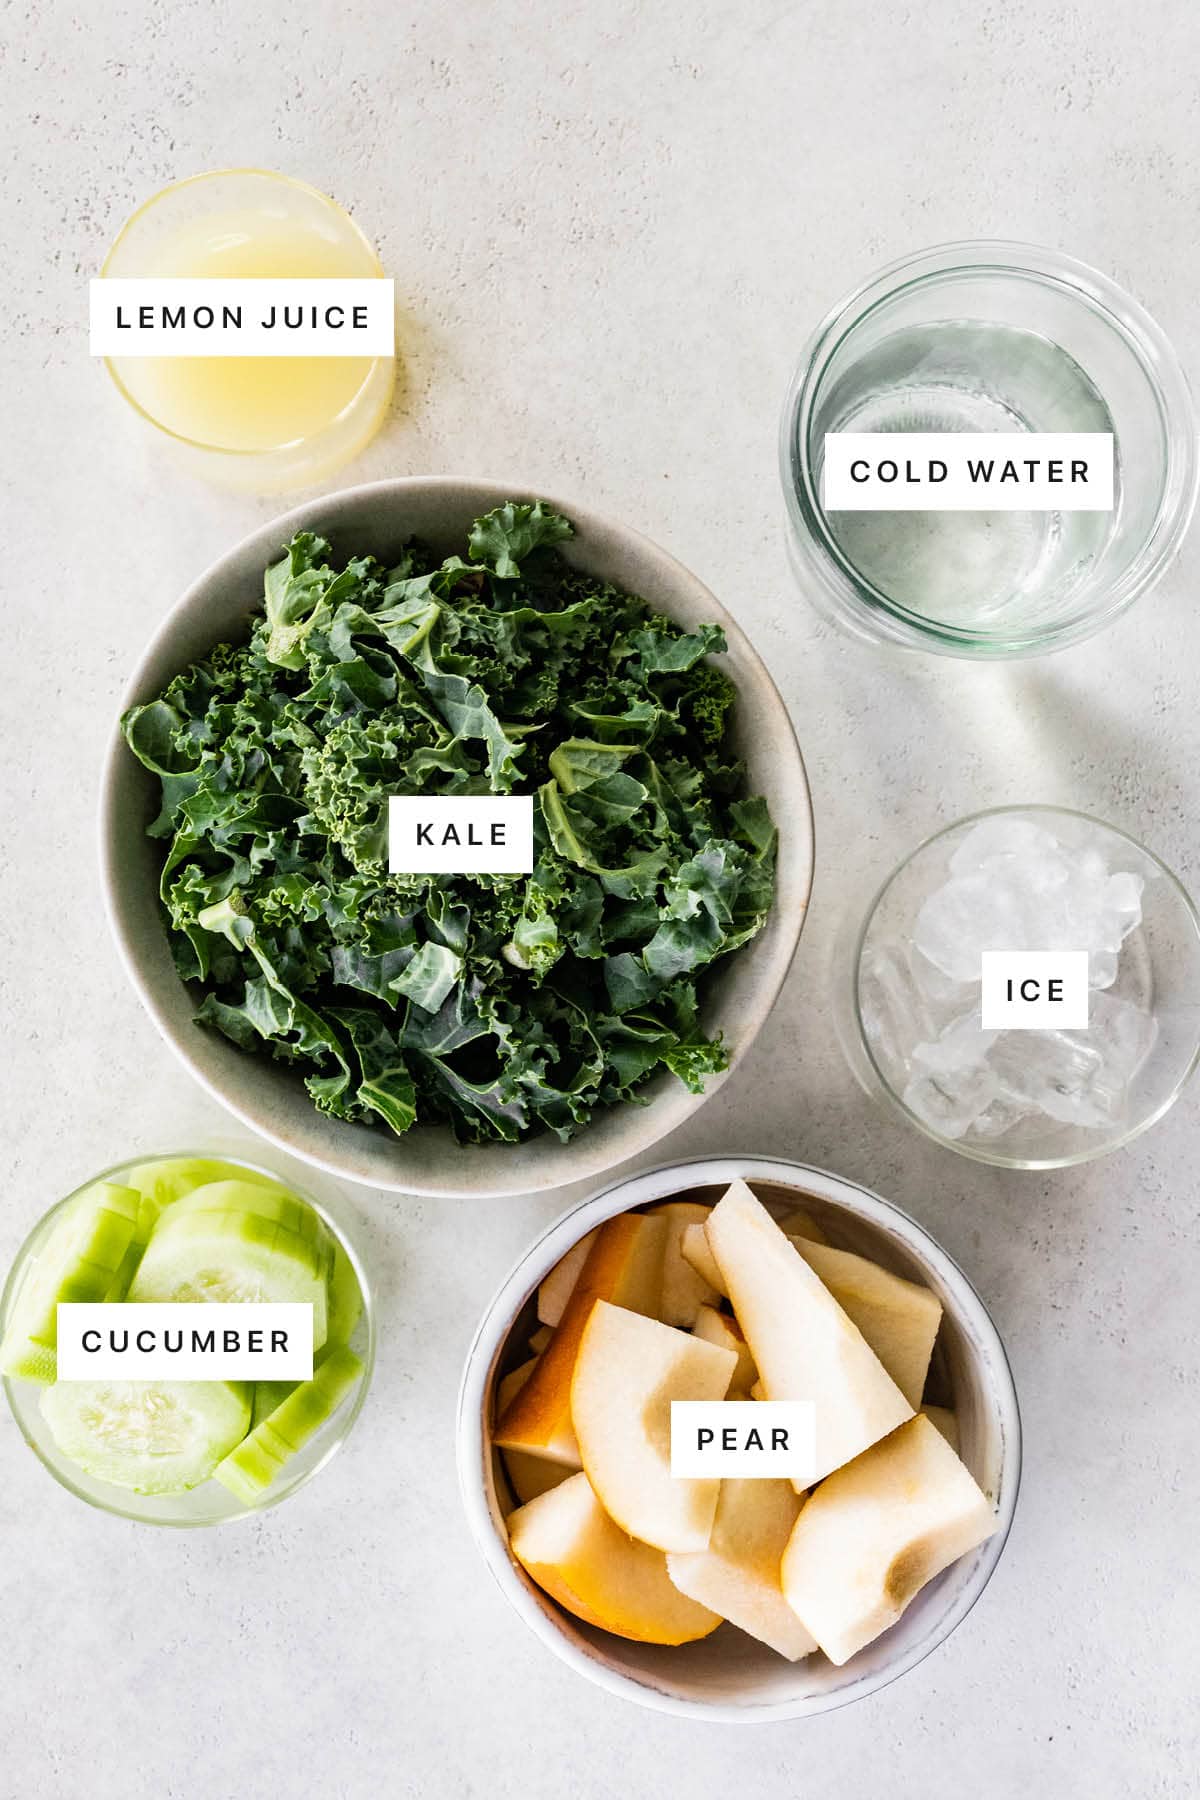 Ingredients measured out to make a Green Lemonade Smoothie: lemon juice, cold water, kale, ice, cucumber and pear.